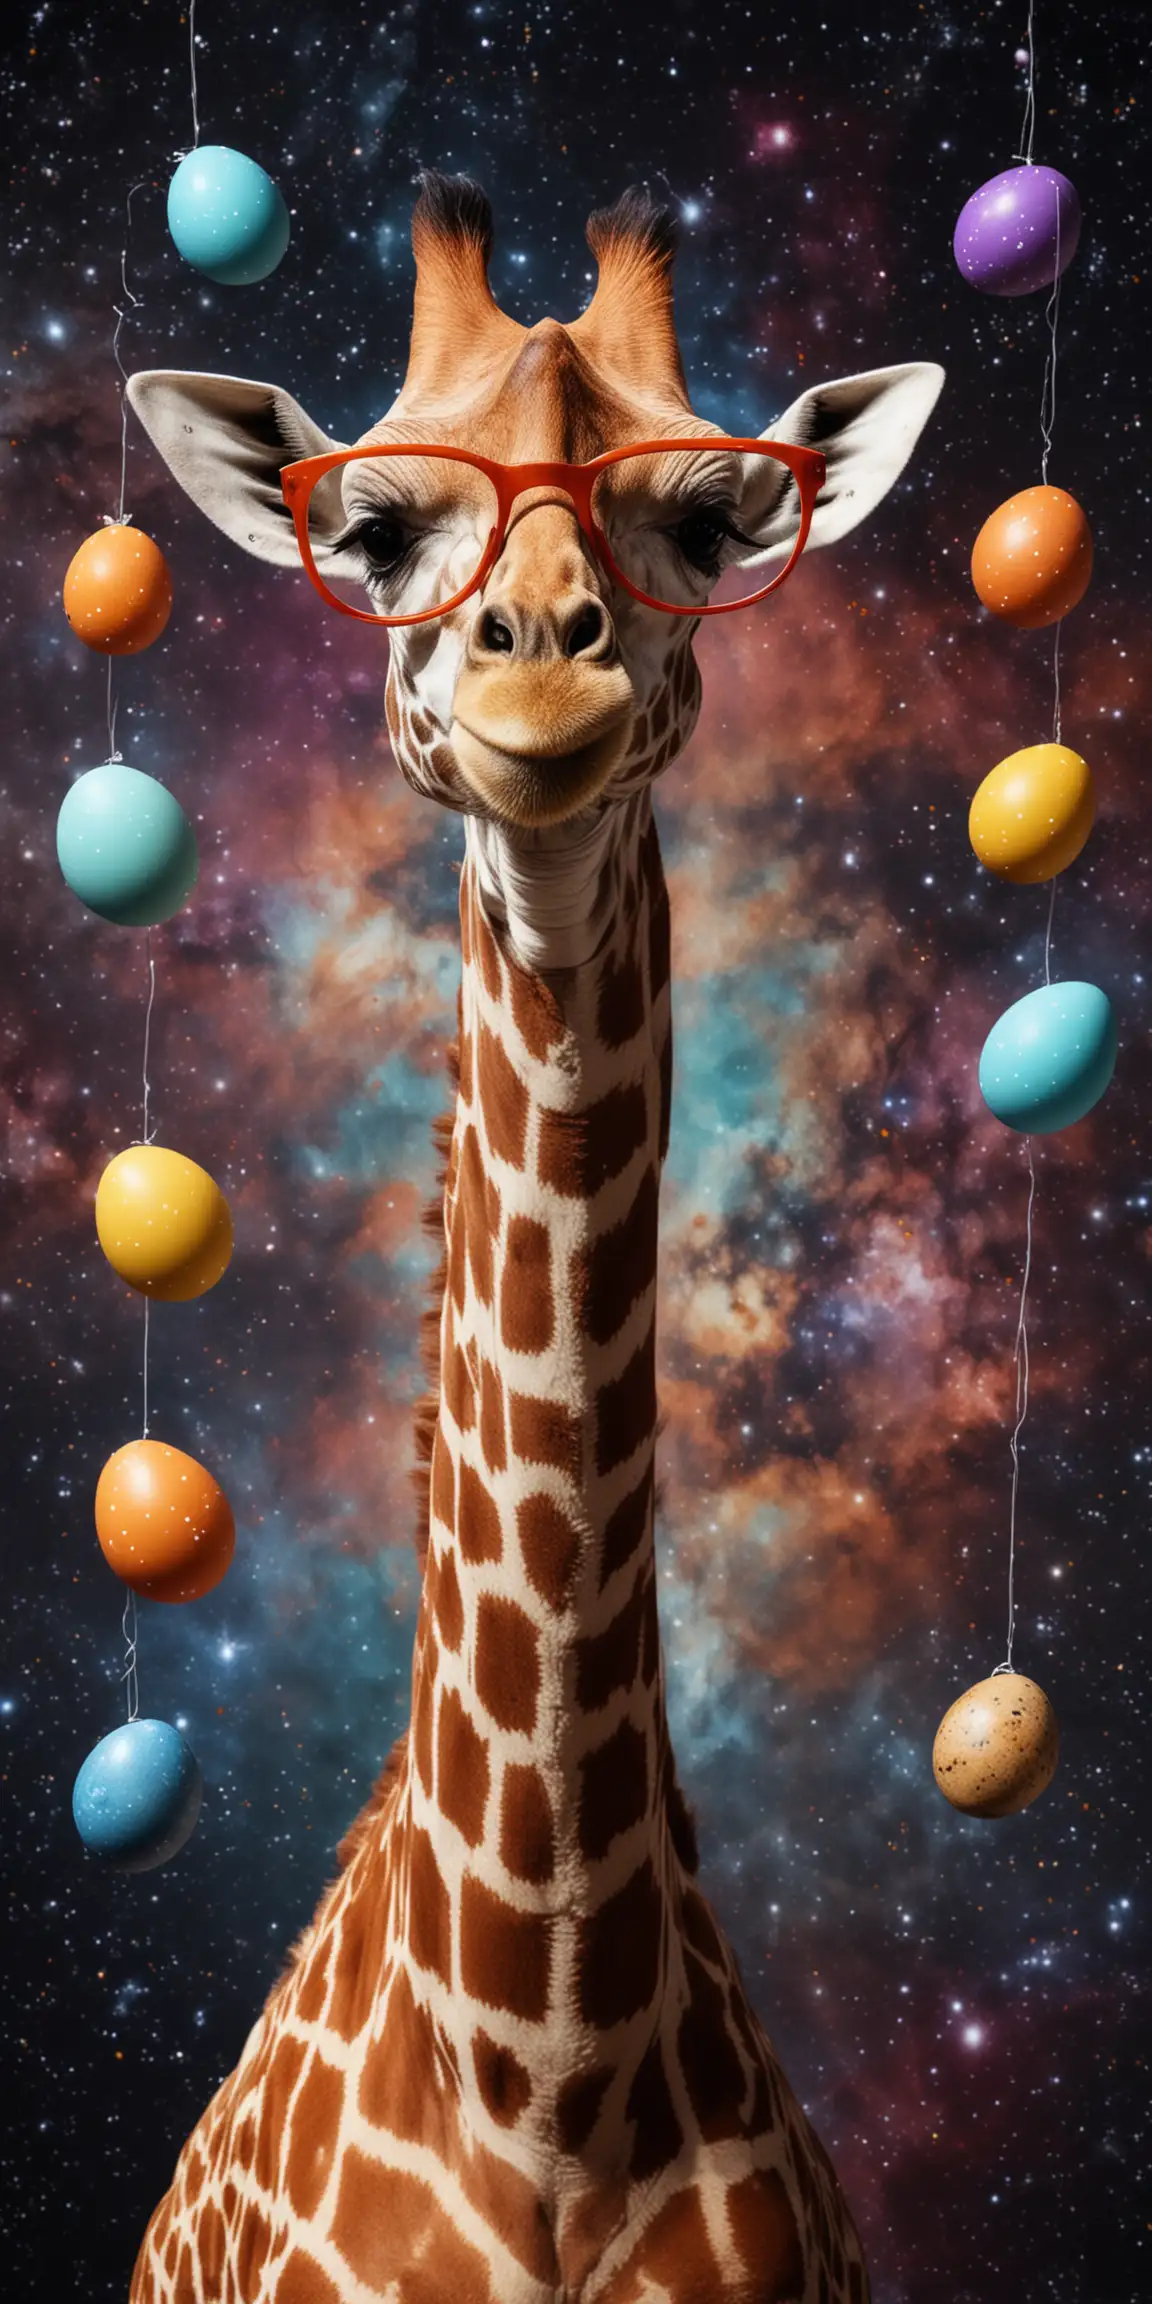 Giraffe with glasses in the space with ostern eier